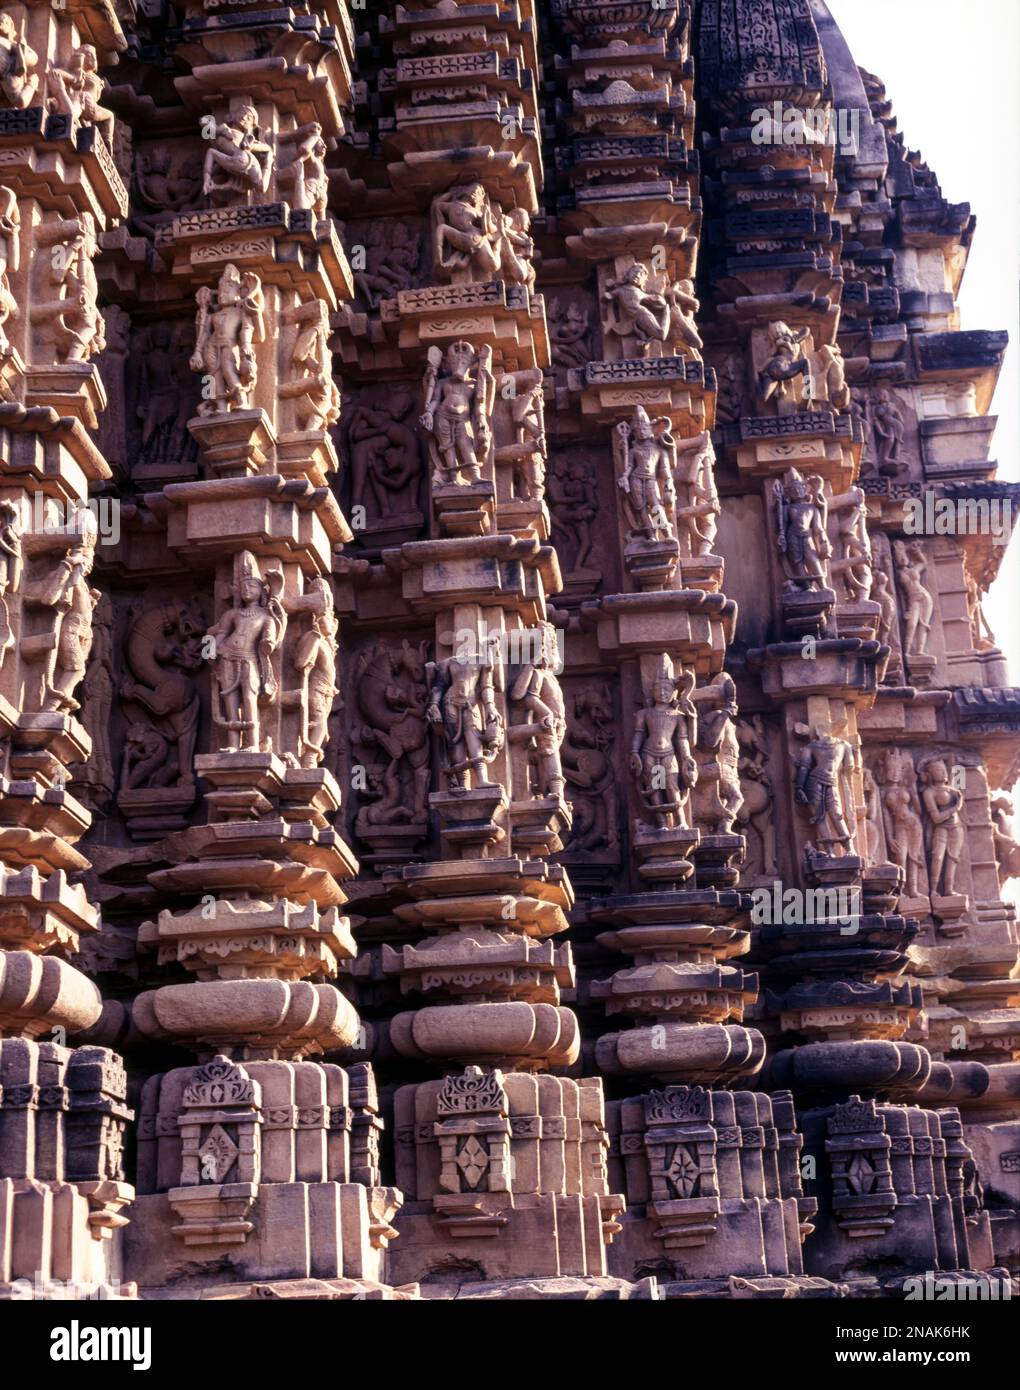 Sculptures on the exterior of the Duladeo Temple walls in Khajuraho, Madhya Pradesh, India Stock Photo